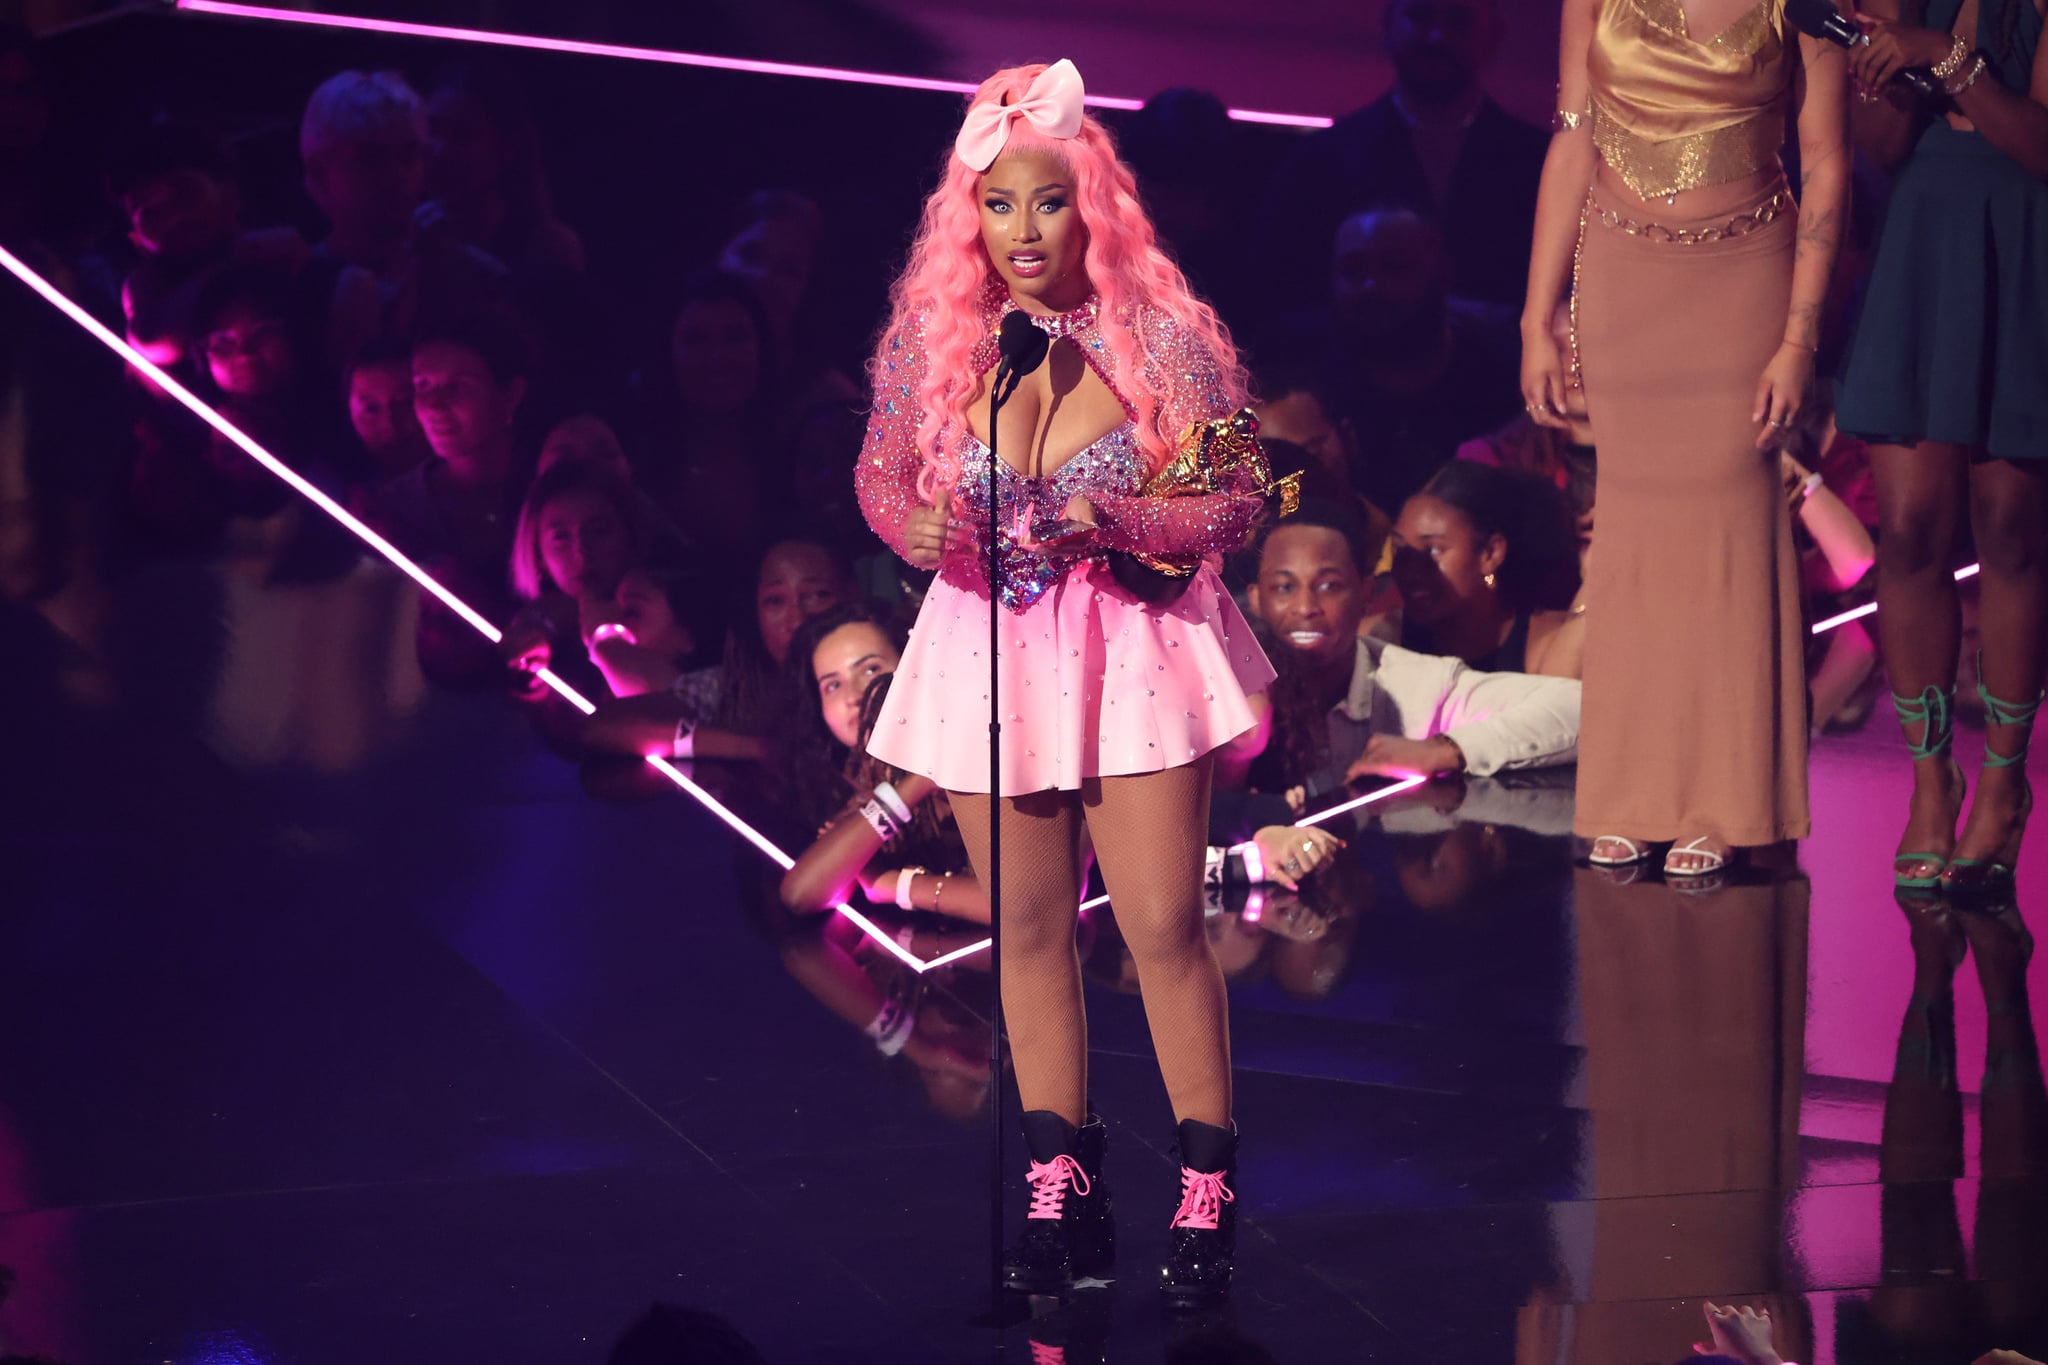 NEWARK, NEW JERSEY - AUGUST 28: Nicki Minaj accepts the Michael Jackson Video Vanguard Award onstage at the 2022 MTV VMAs at Prudential Center on August 28, 2022 in Newark, New Jersey. (Photo by Arturo Holmes/Getty Images)